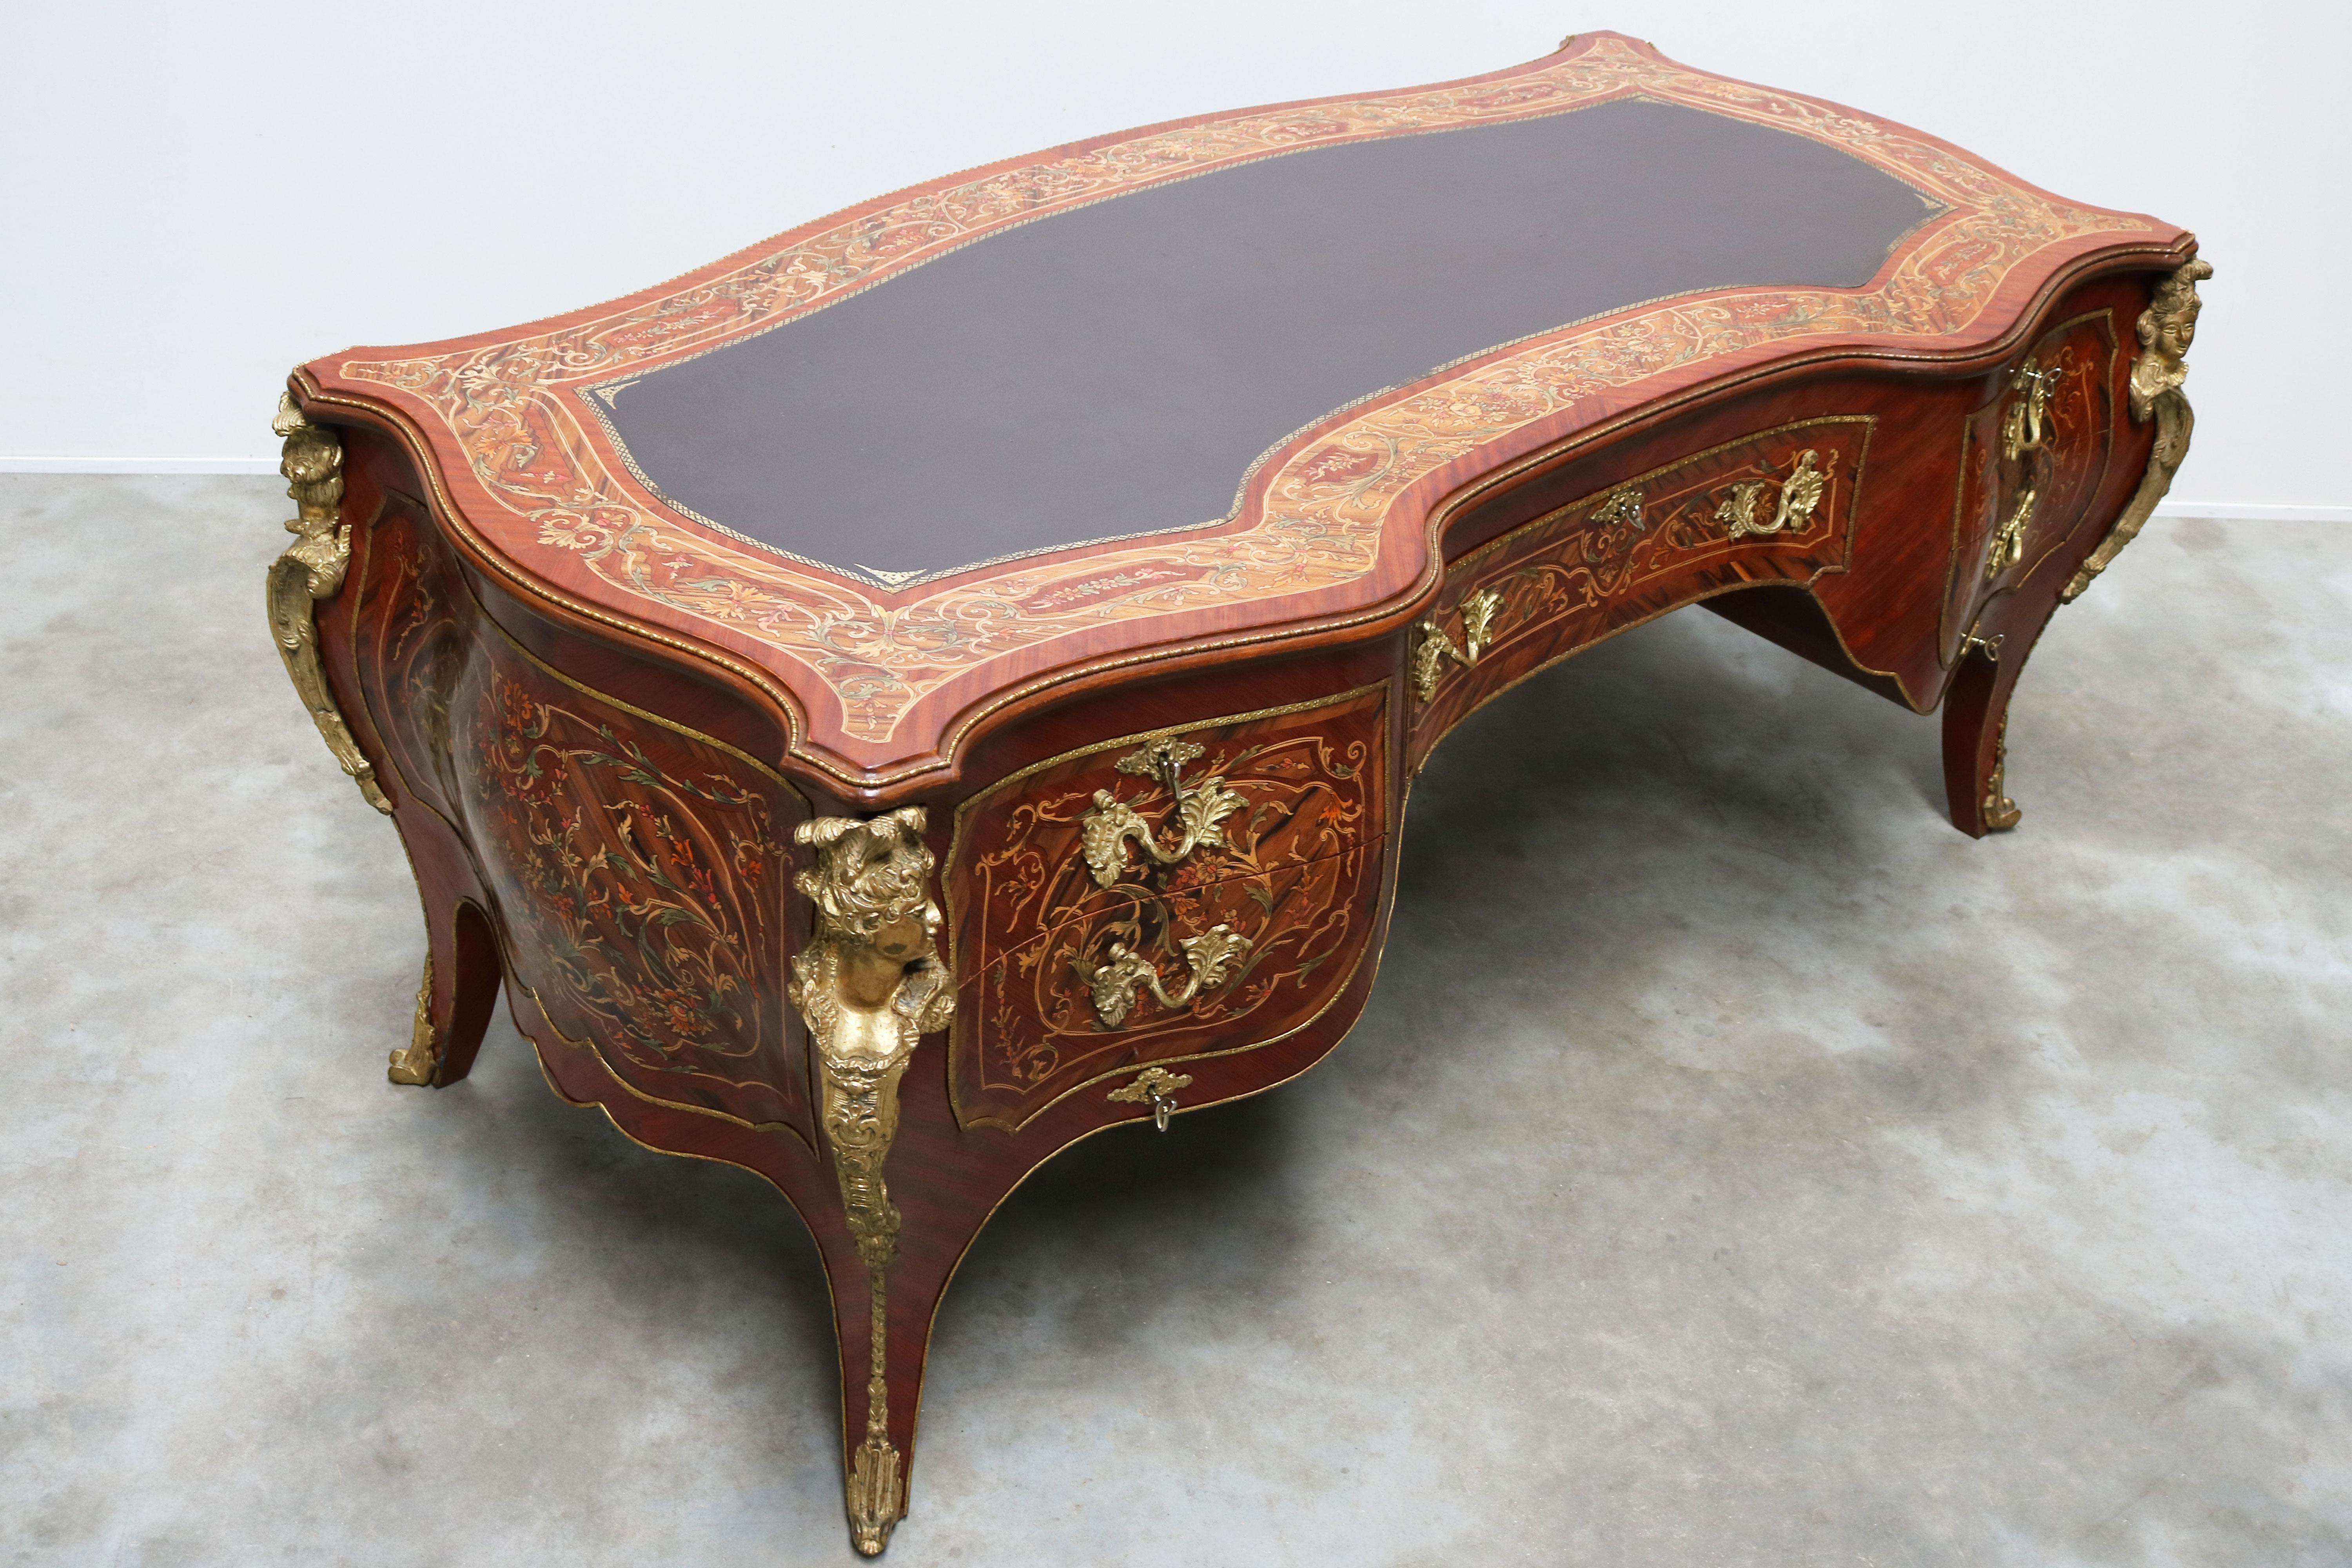 19th Century Rounded Italian Executive Desk in Louis XV Style Marquetry Bronze 1950 Inlaid For Sale